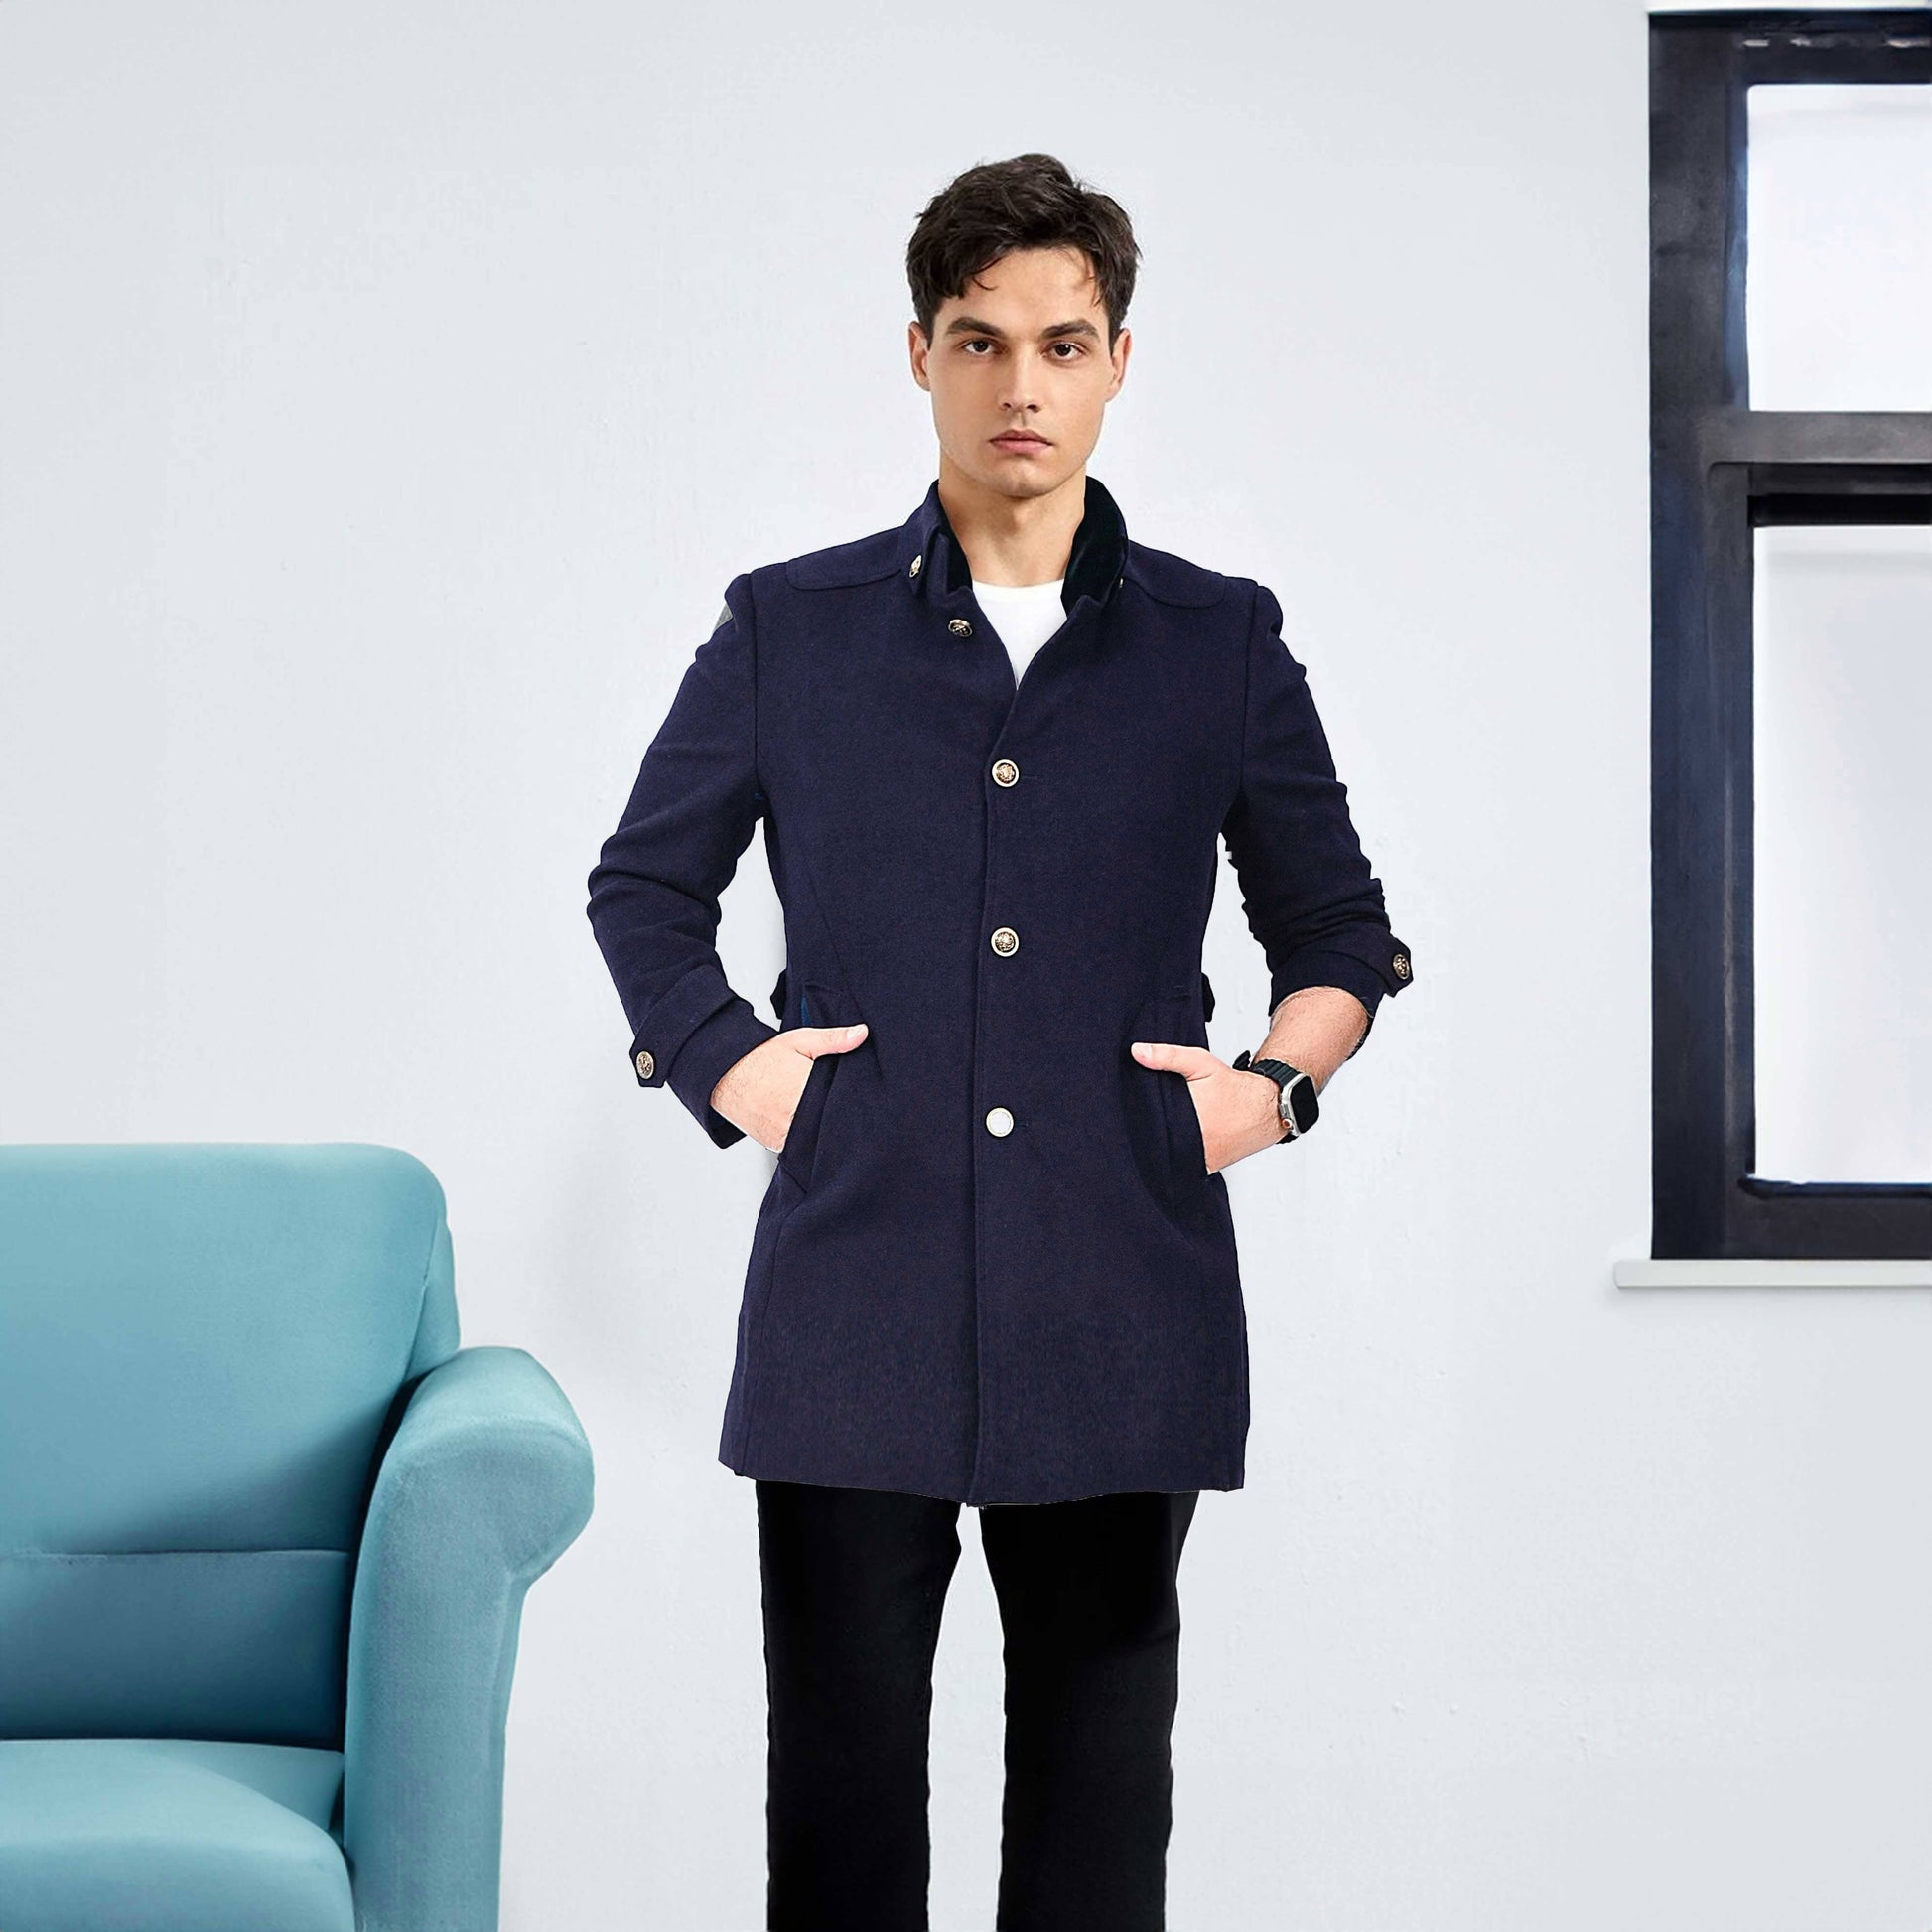 Fashion Men's Winter Outwear British Style Imported Coat Men's Jacket First Choice Navy M 